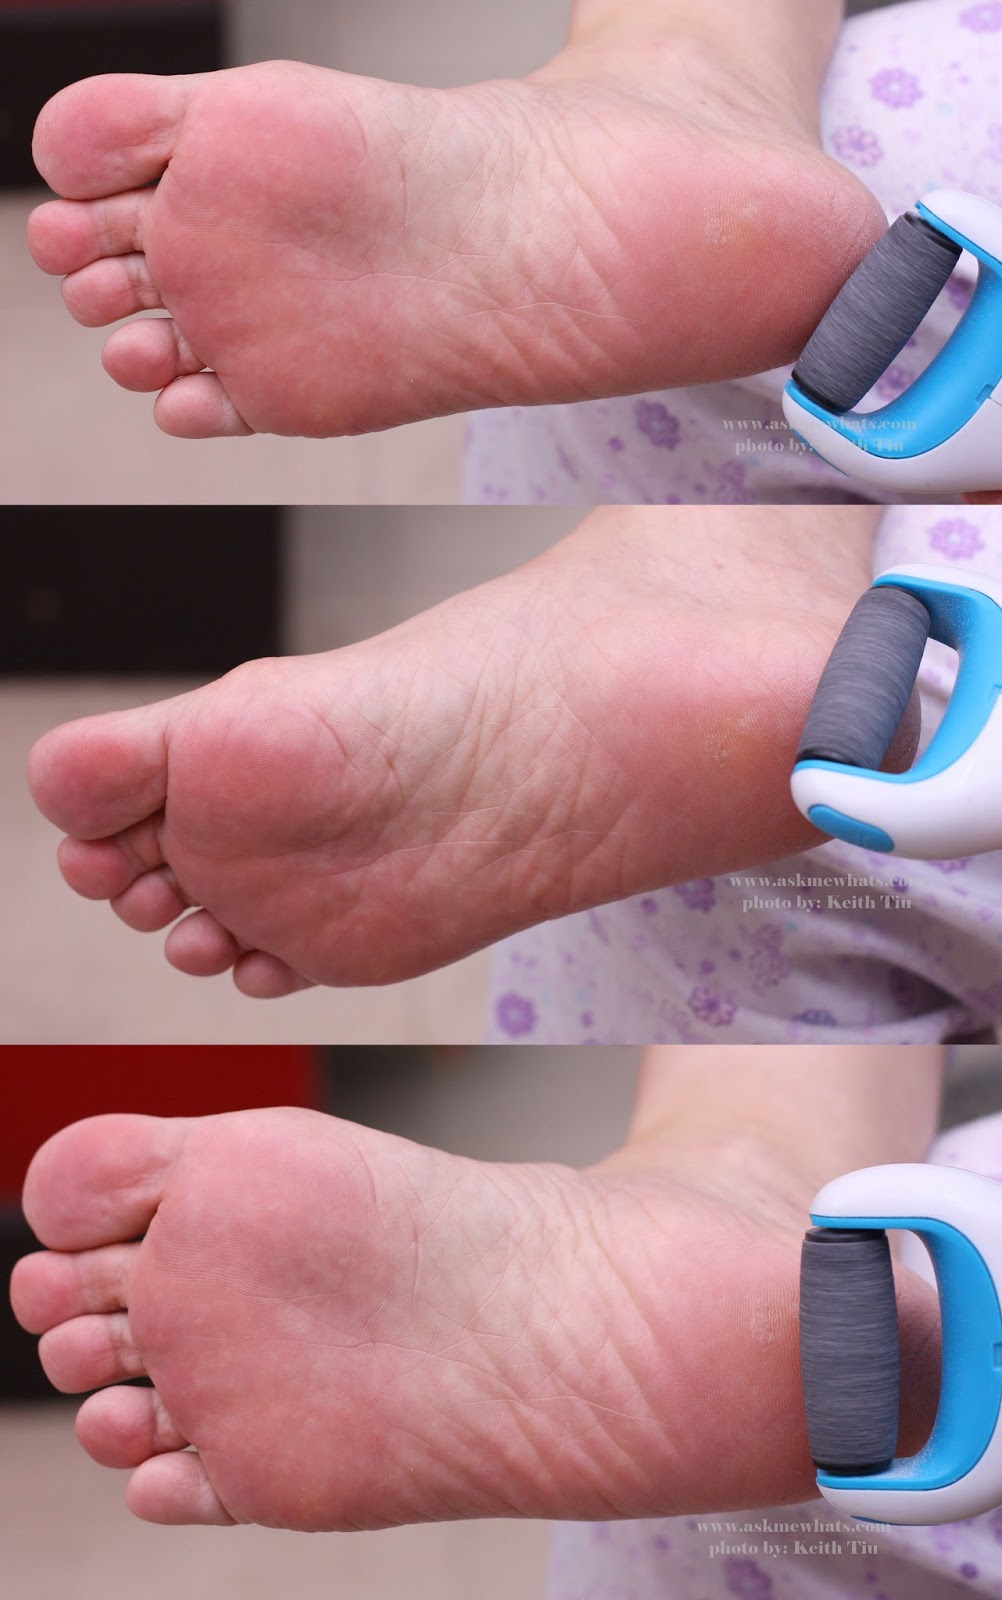 Scholl Velvet Smooth Electric Foot File Review (By a Podiatrist)